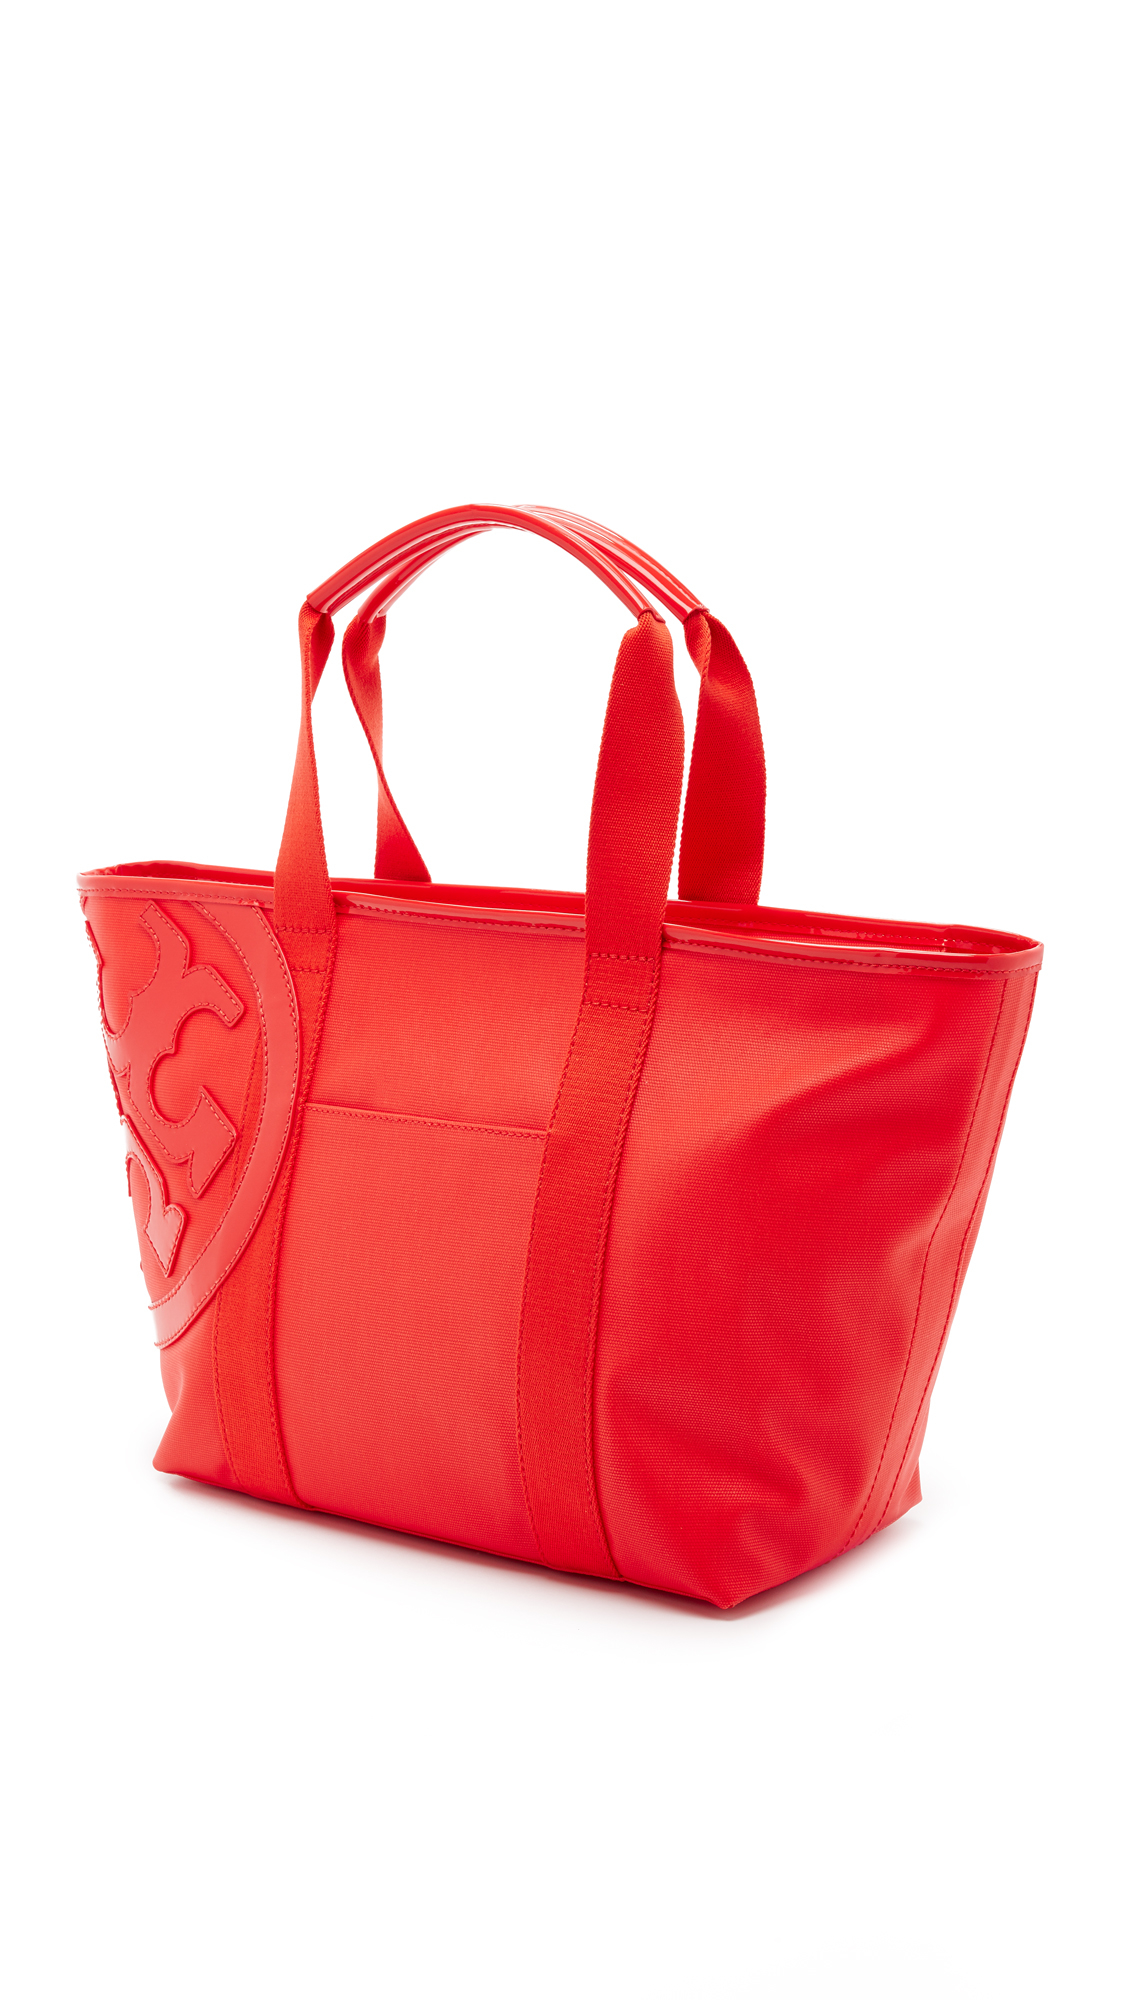 Tory Burch Canvas Tote Bag - Red Totes, Handbags - WTO544037